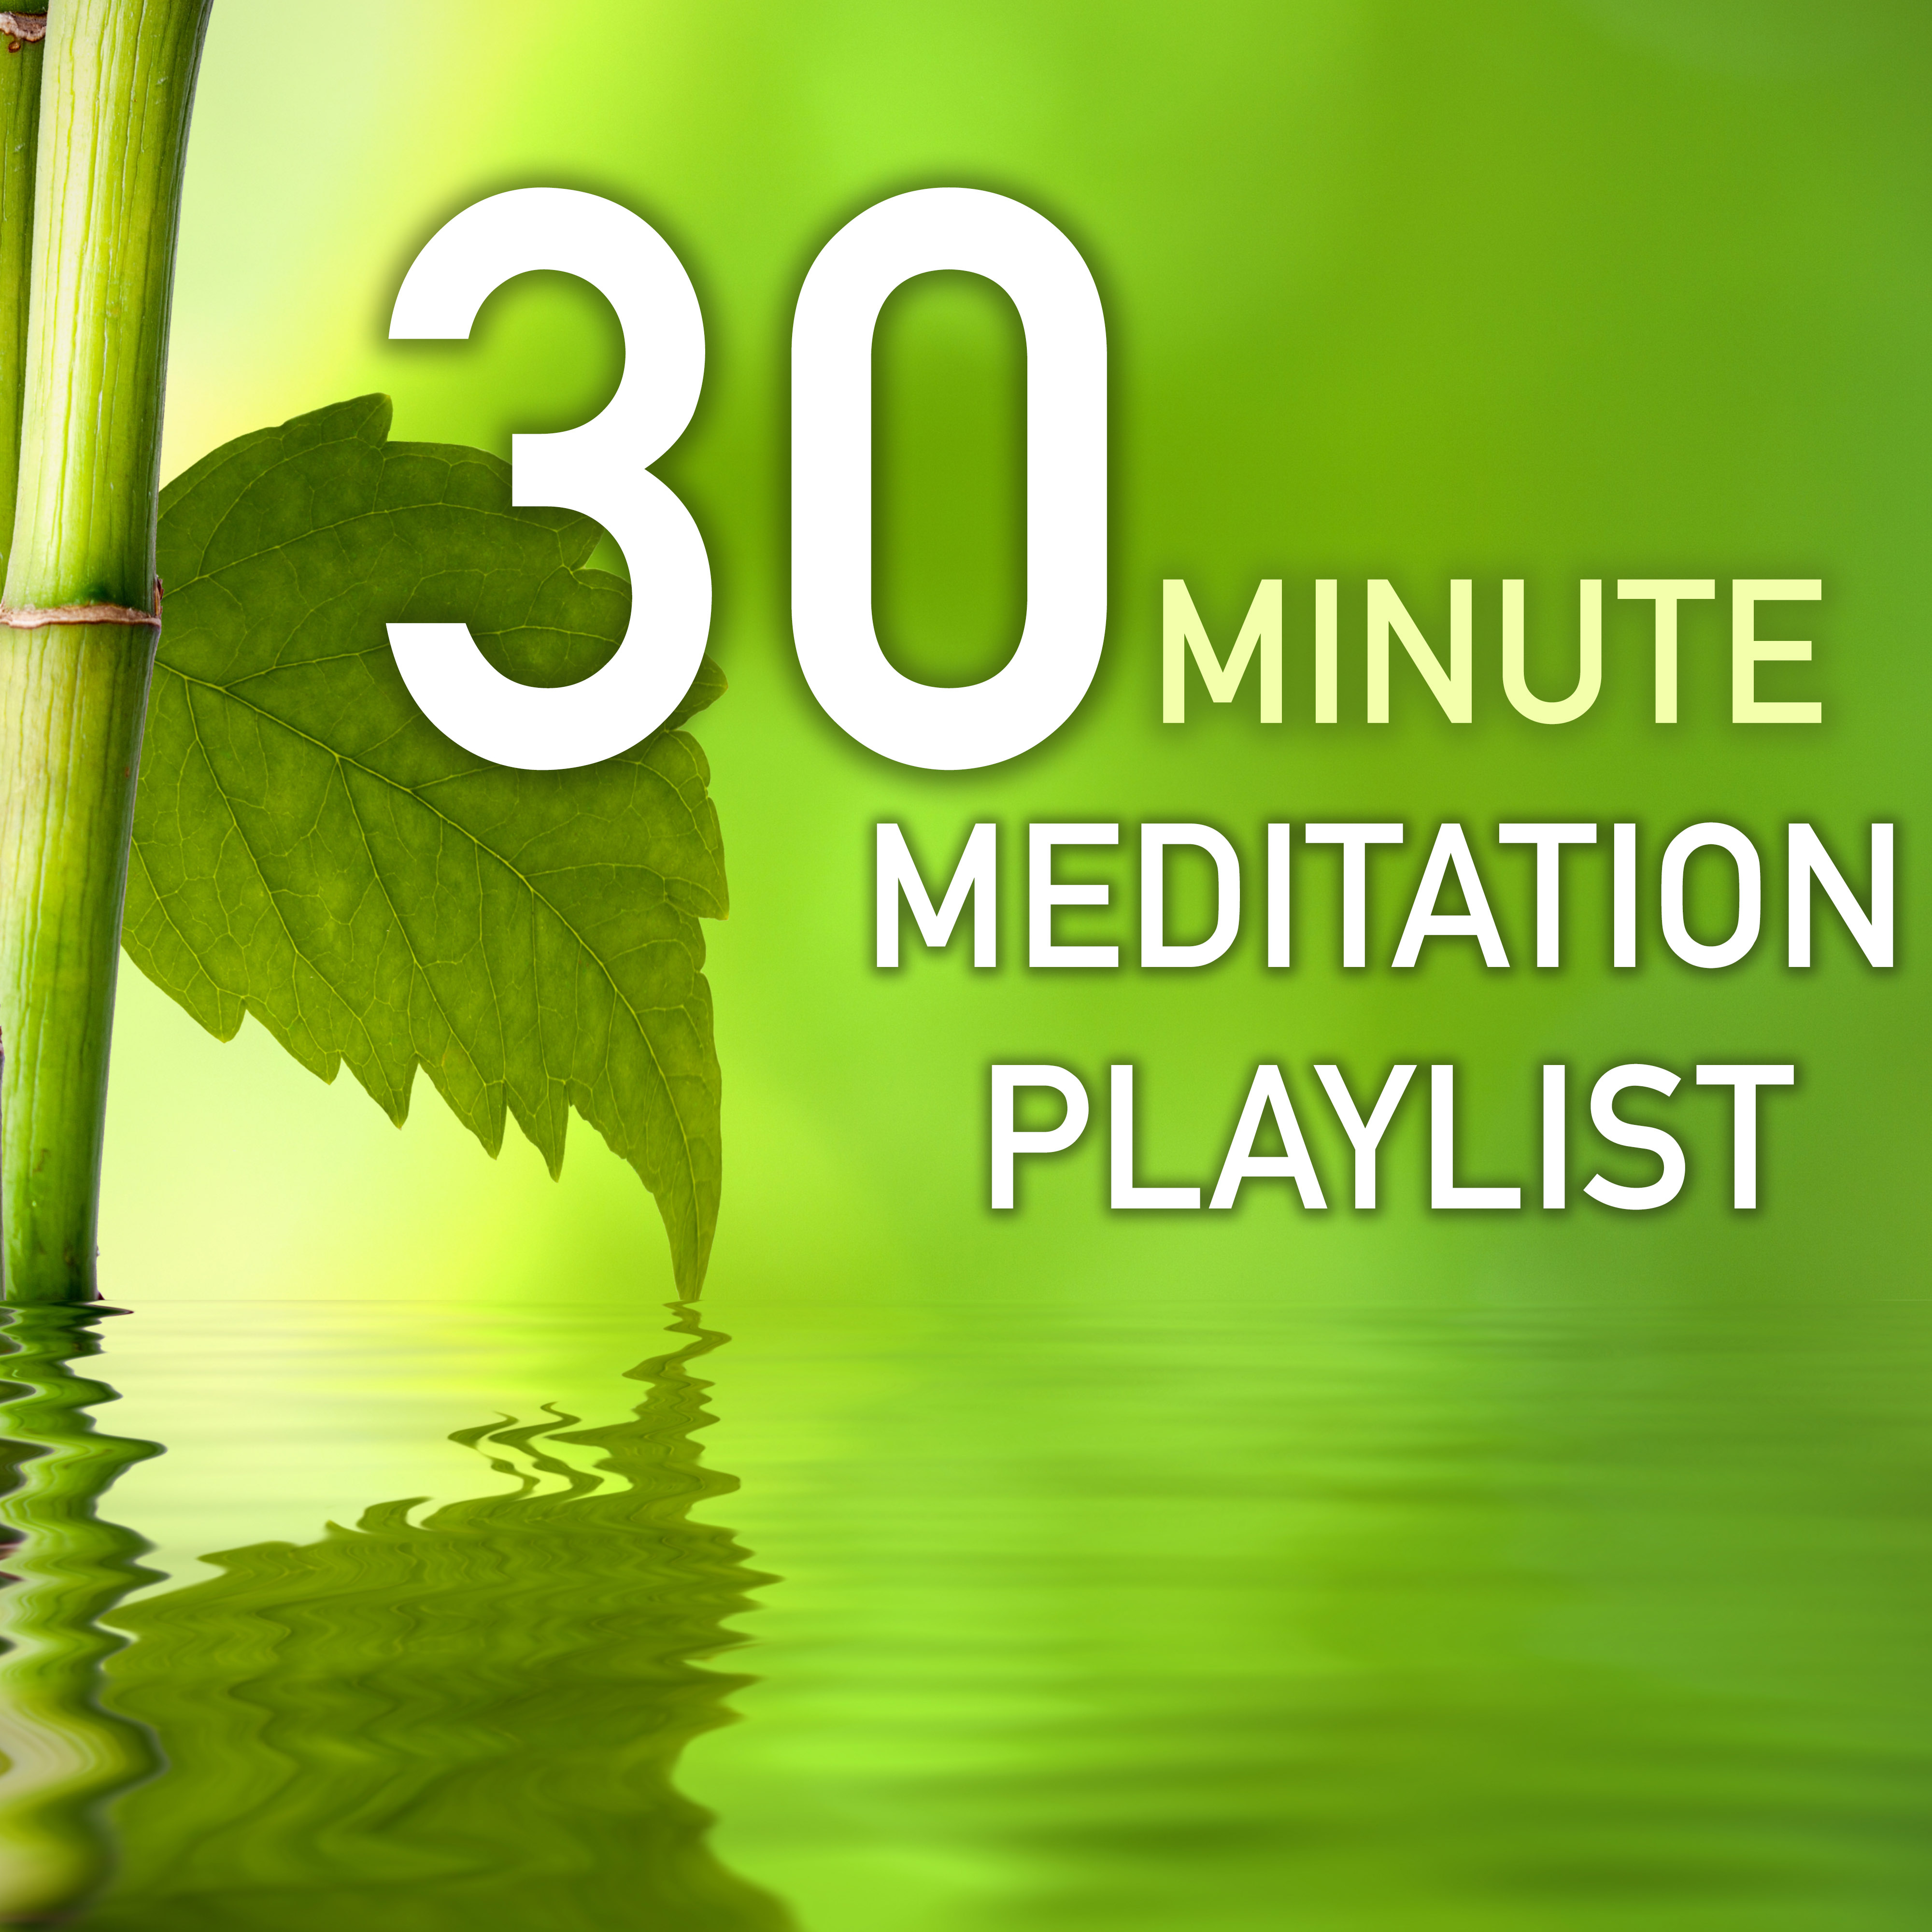 30 Minute Meditation Playlist - Peaceful Sounds of Nature for Meditating Sessions in the Morning and Evening